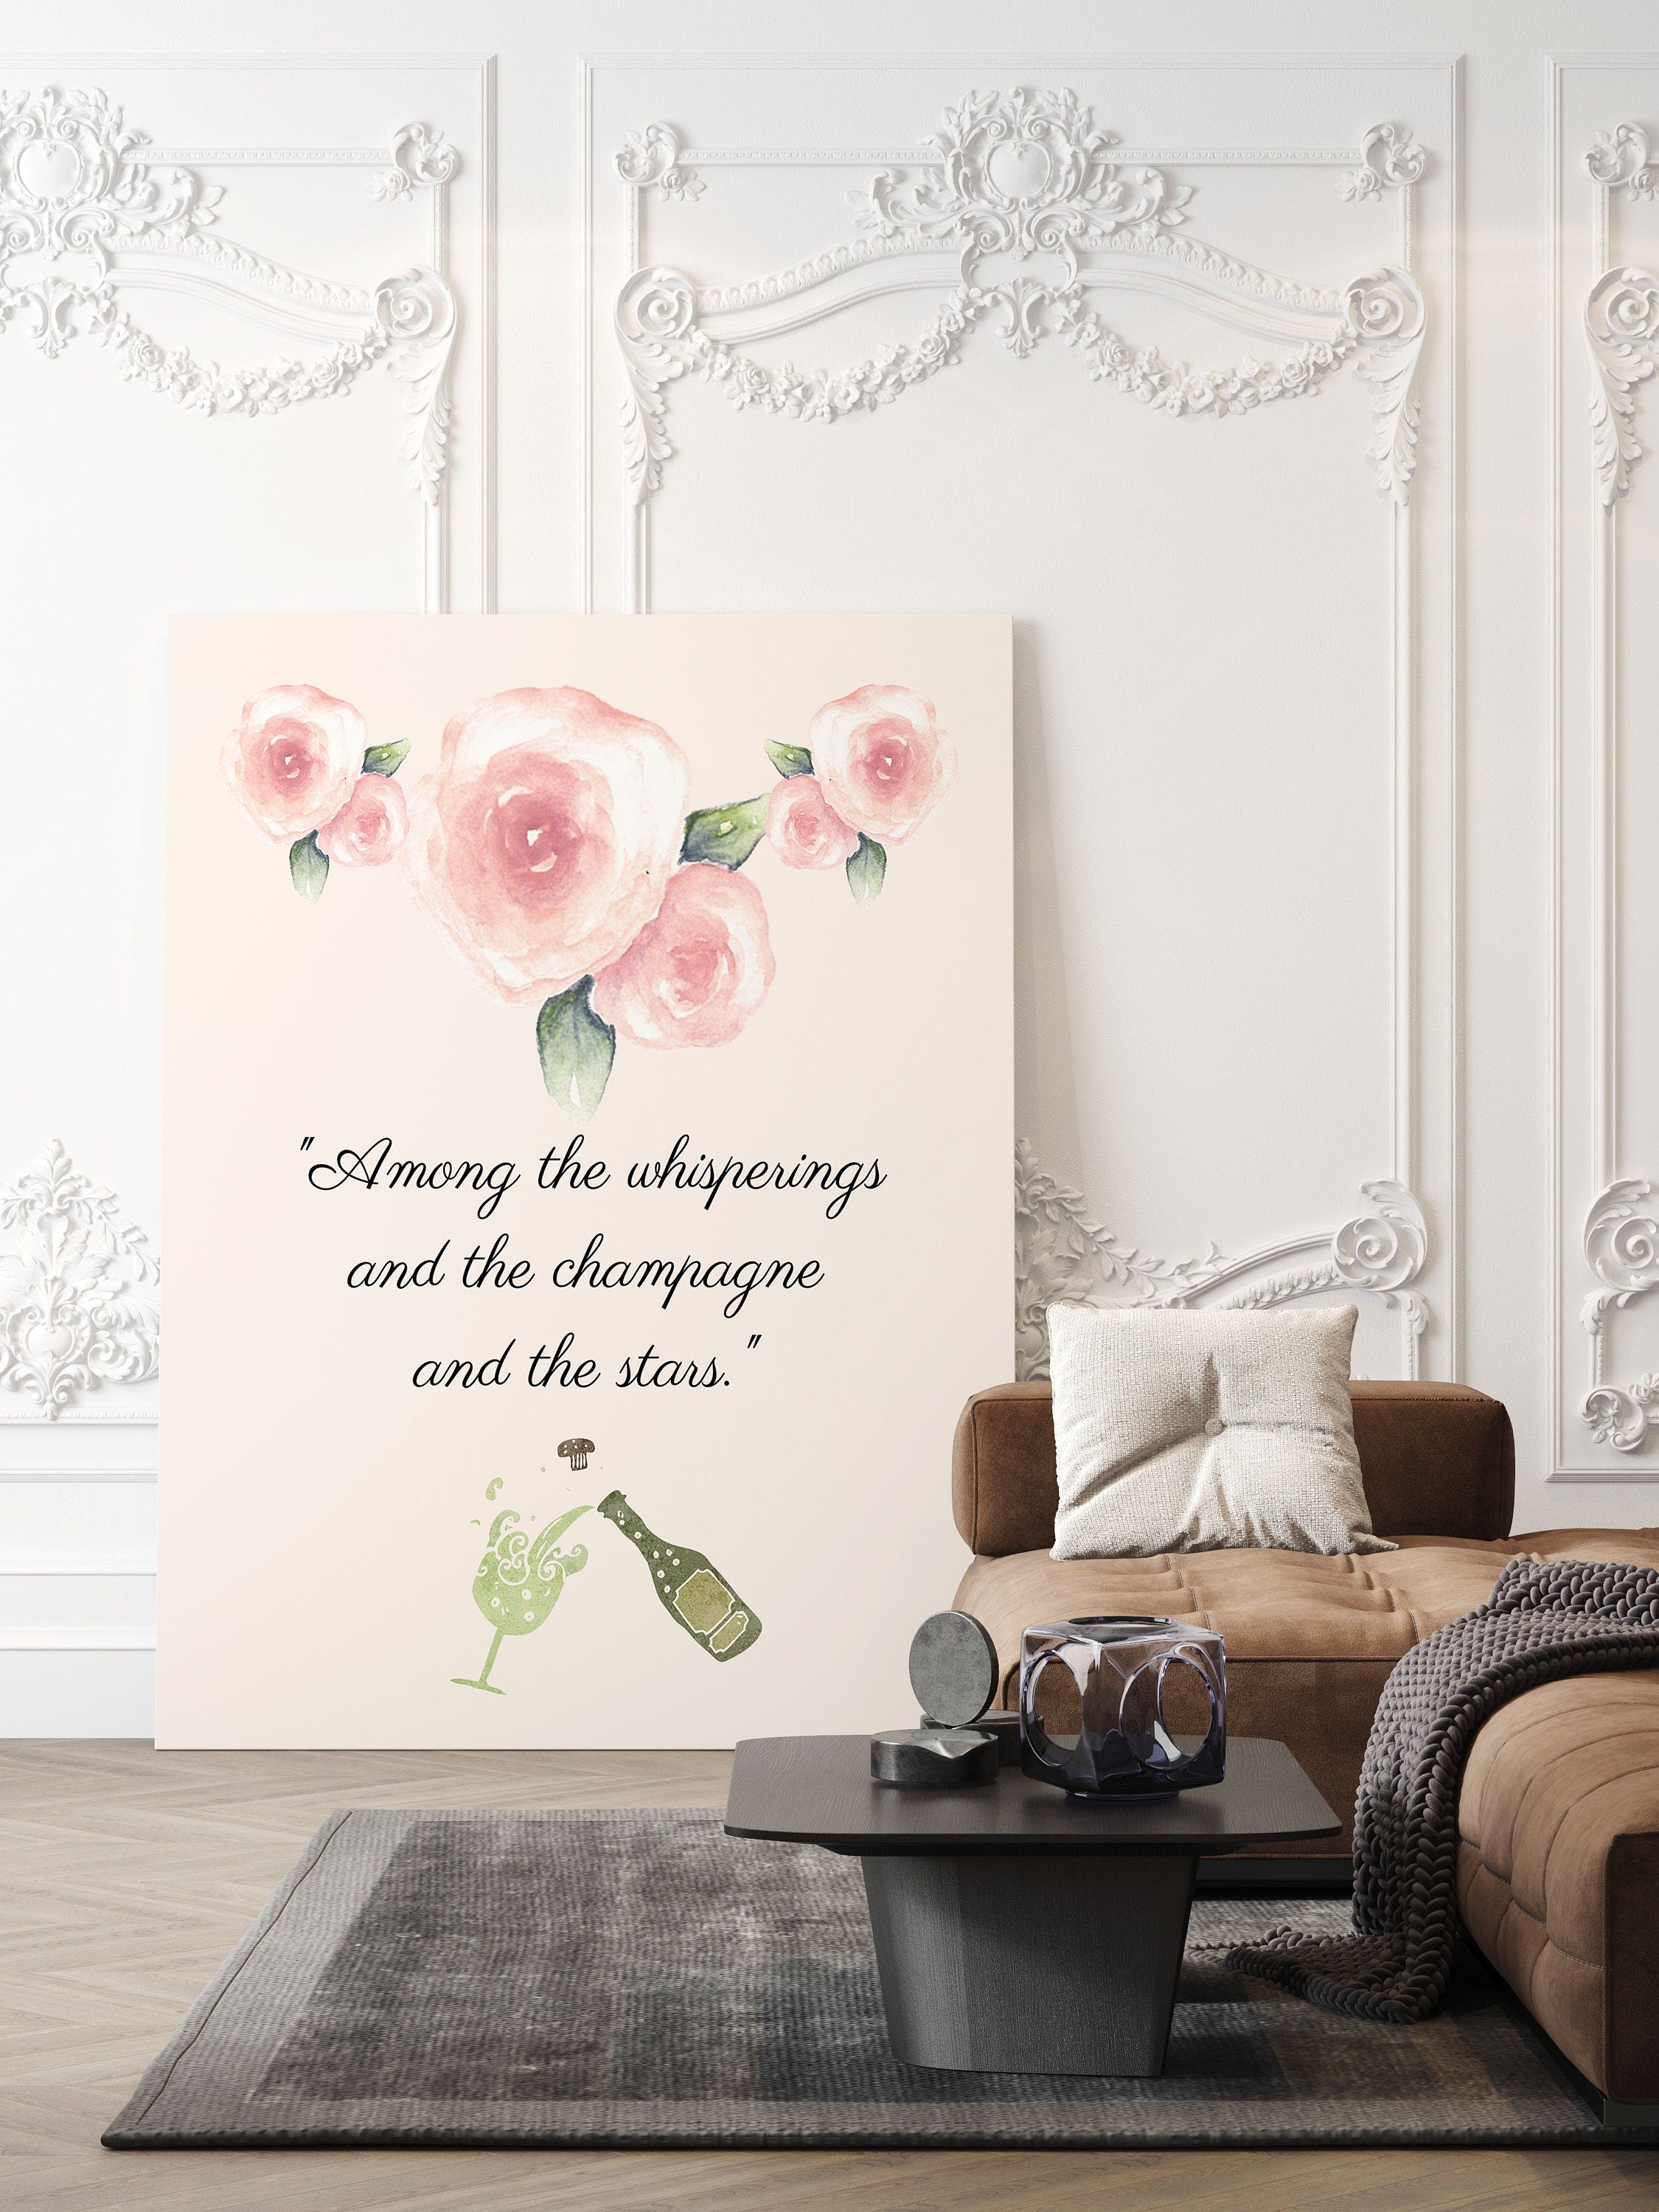 F Scott Fitzgerald Quote Champagne and Stars Great Gatsby Print in Green and Blush Pink for Living Room Decor